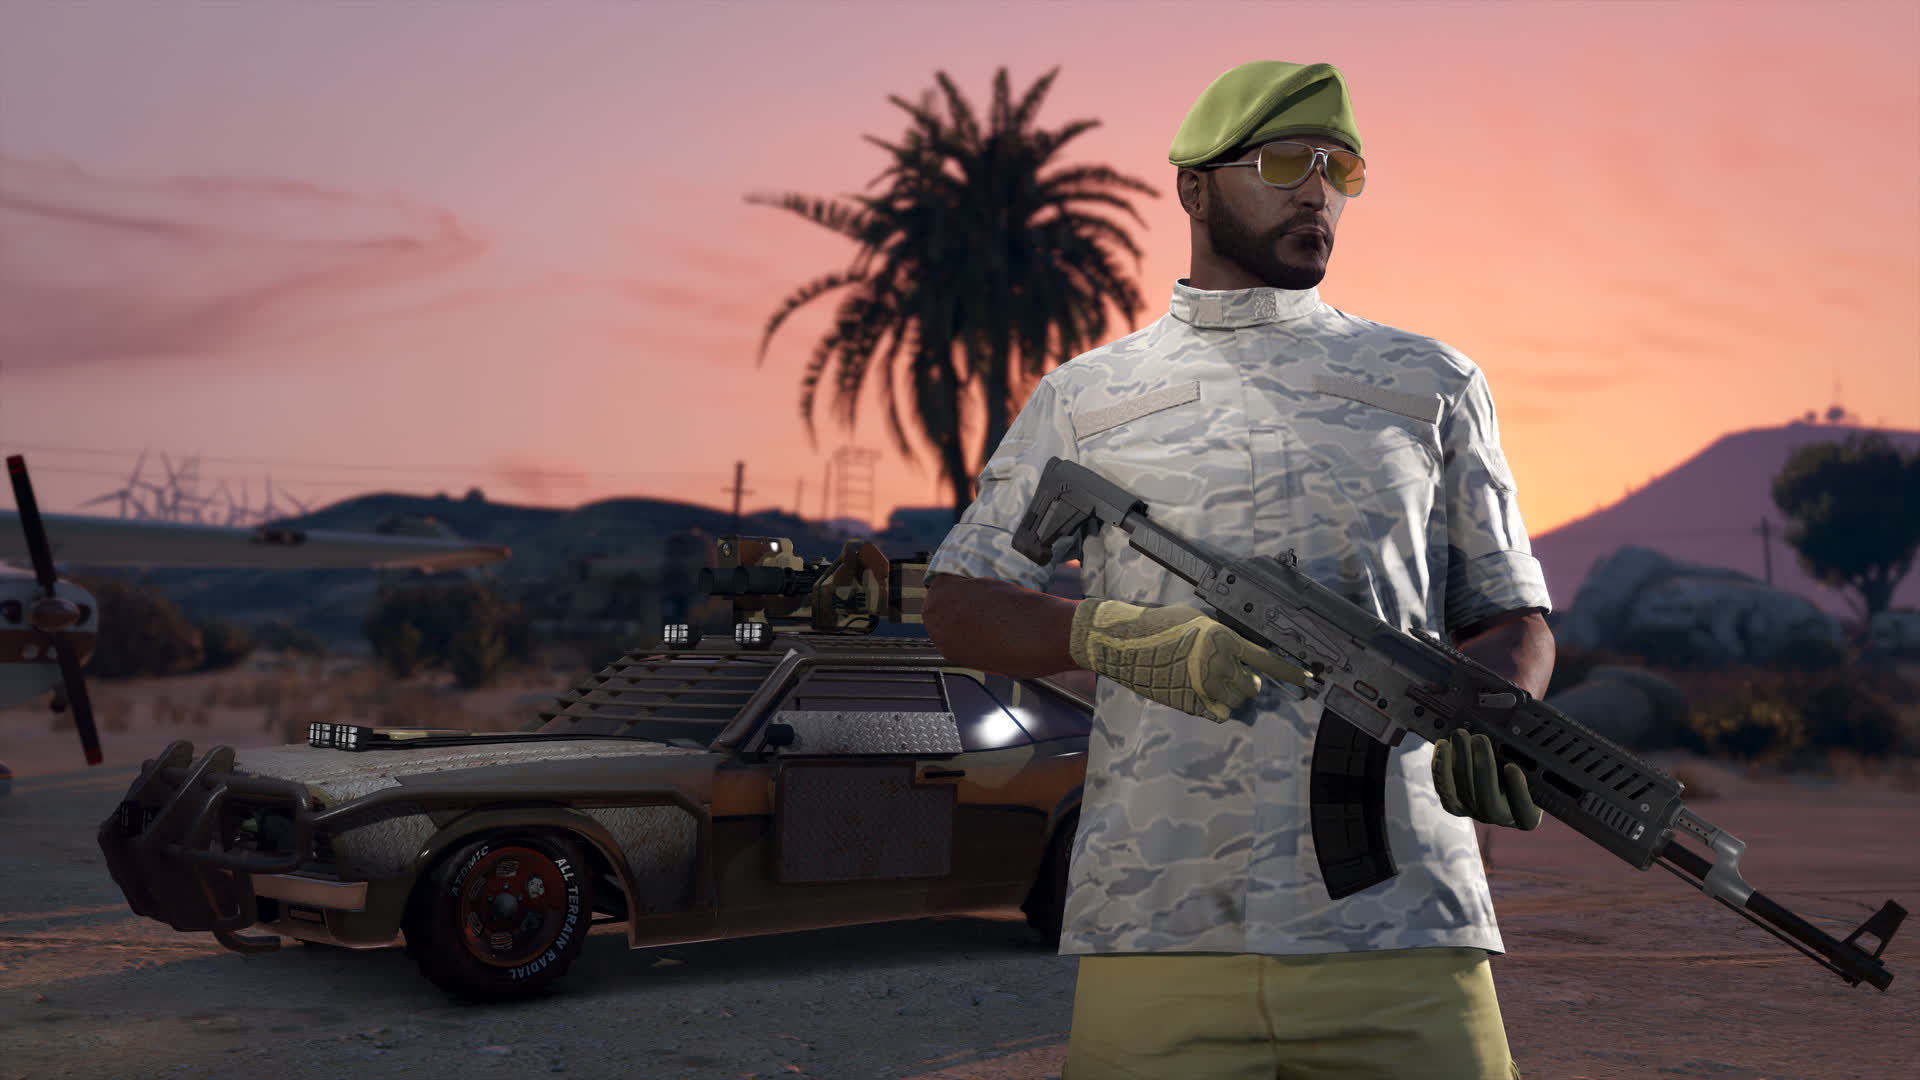 GTA V ships over 150 million copies, pushing the franchise to over 350 million sold in total